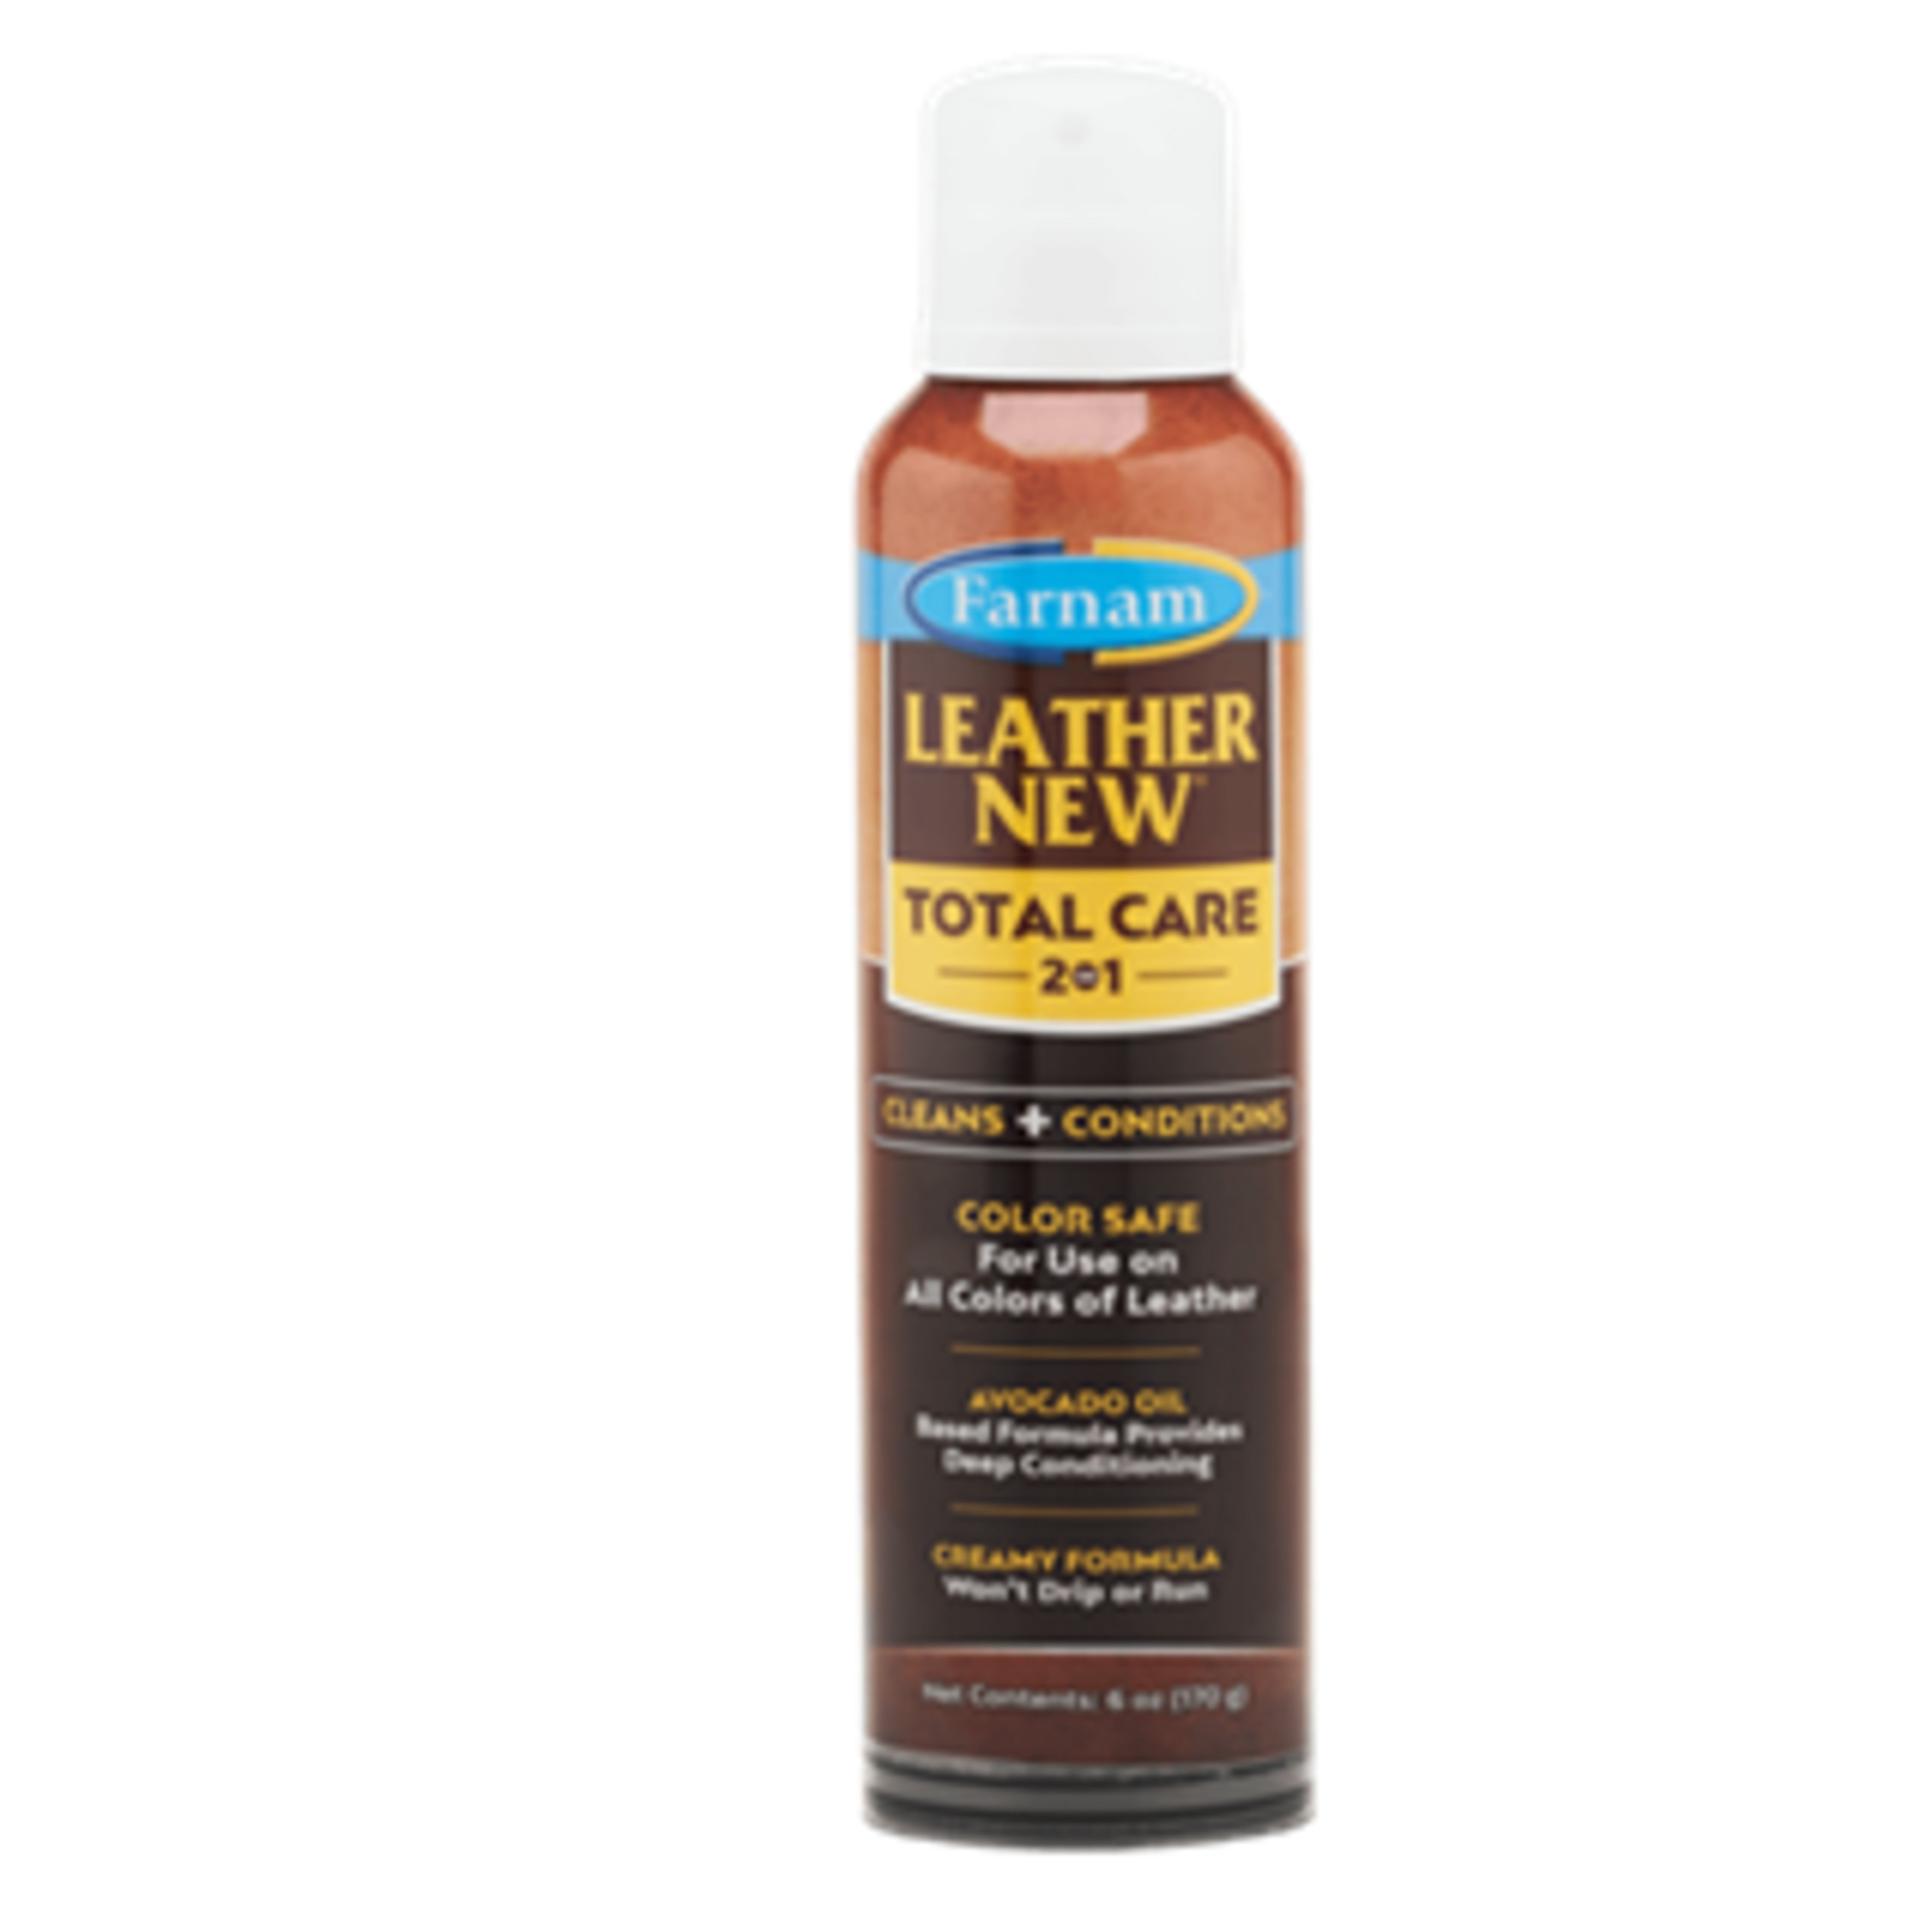 Leather New Total Care 2-in-1 6 oz